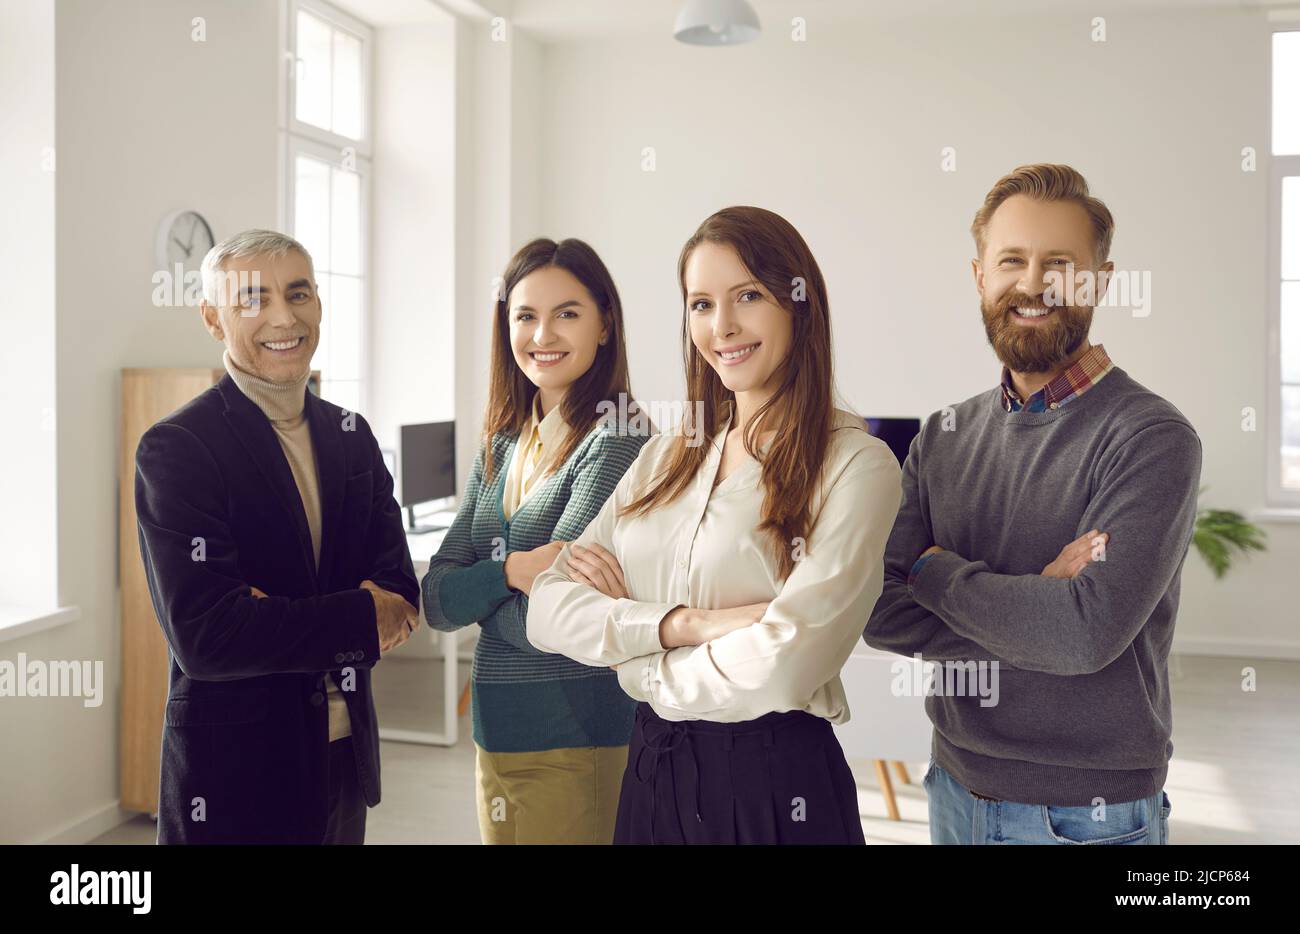 Portrait of smiling diverse businesspeople pose together Stock Photo